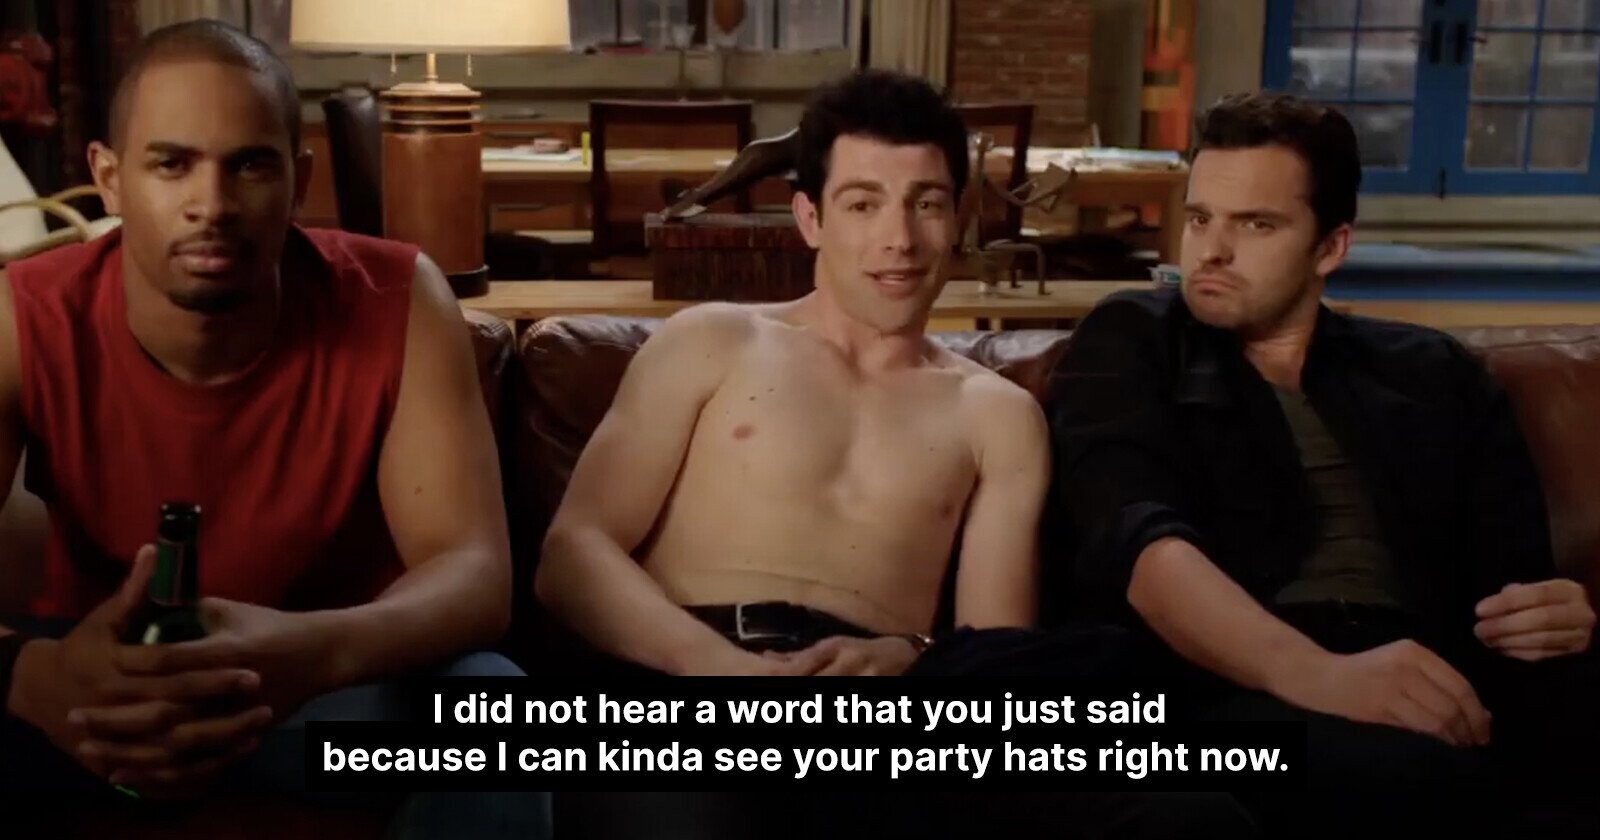 A Glossary of the Best Innuendo ‘New Girl’ Writers Created to Get Around the Network Censors